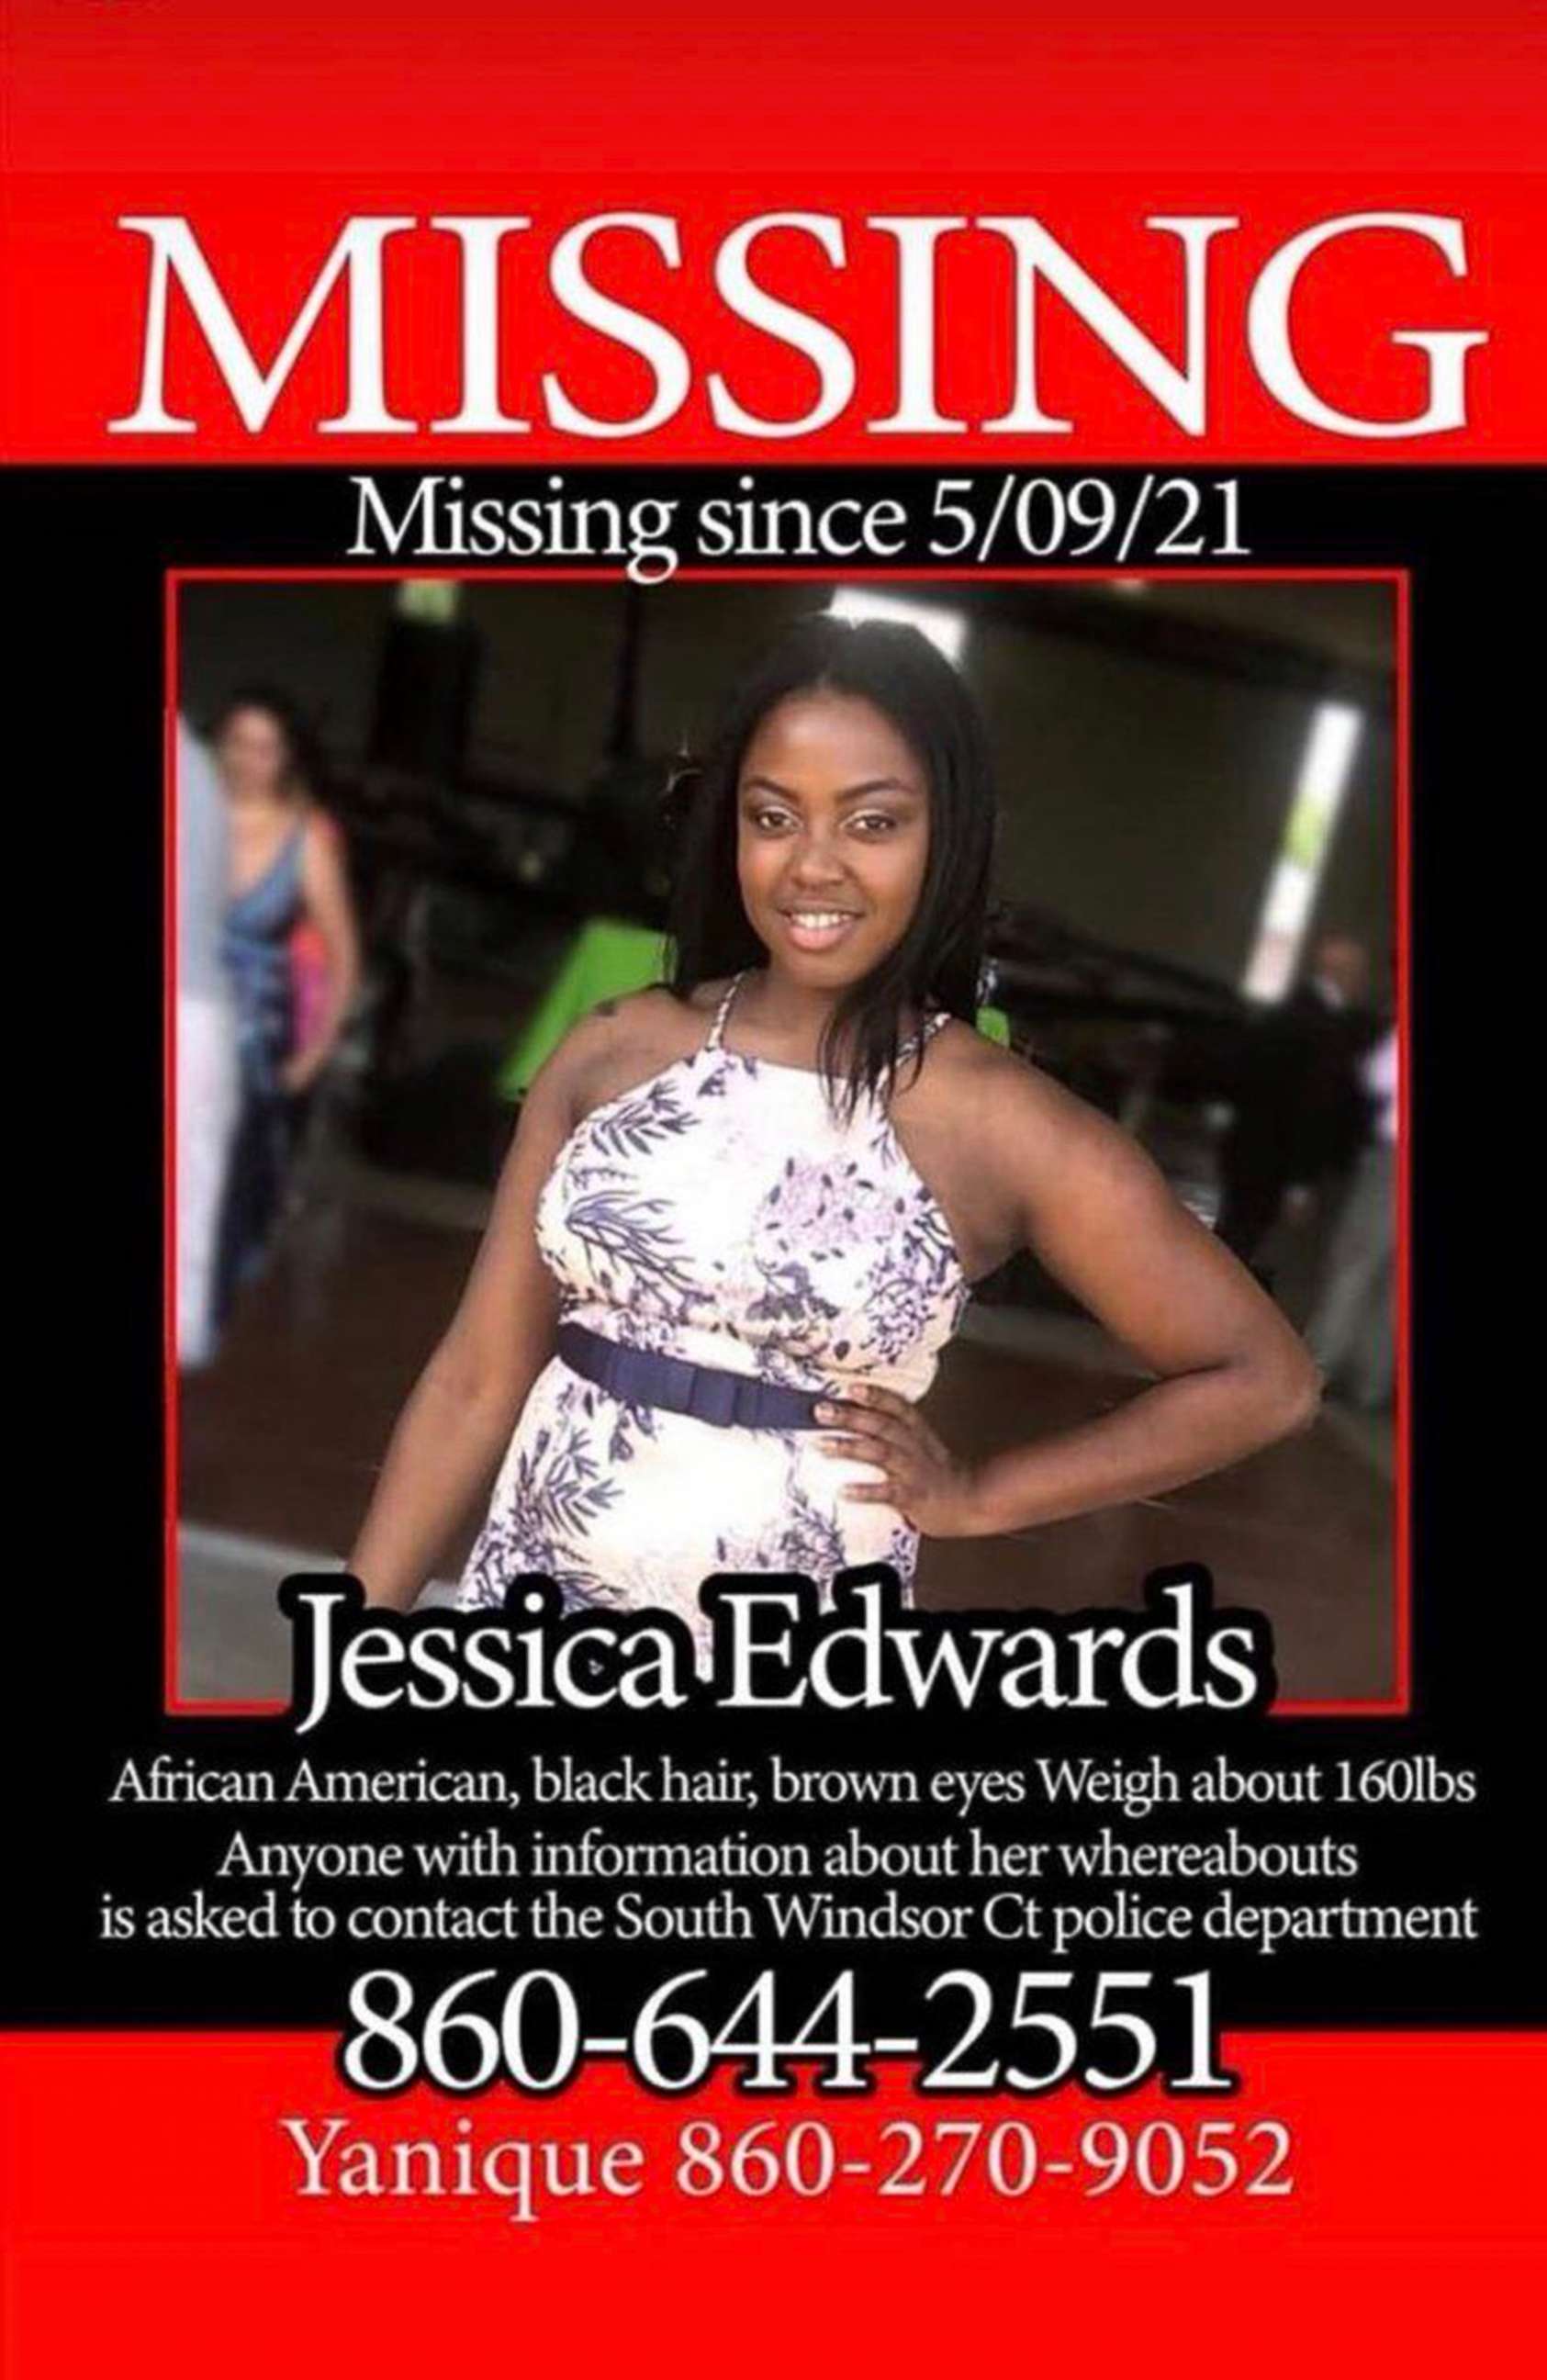 PHOTO: A Missing person poster released by family shows Jessica Edwards of South Windsor, Ct.